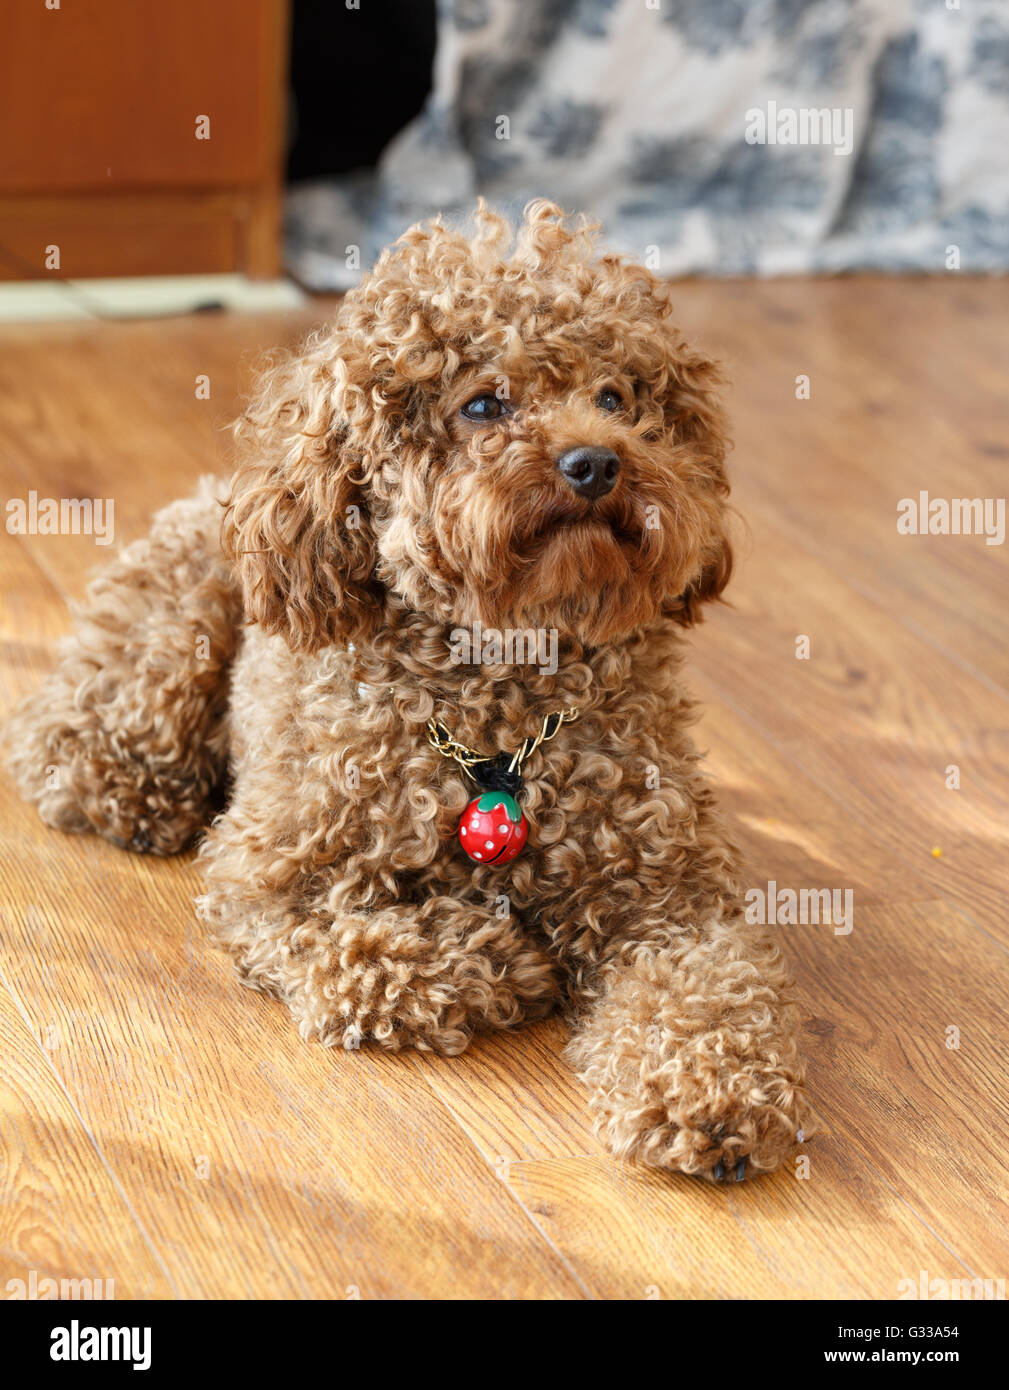 https://c8.alamy.com/comp/G33A54/a-brown-poodle-sitting-on-the-floor-G33A54.jpg